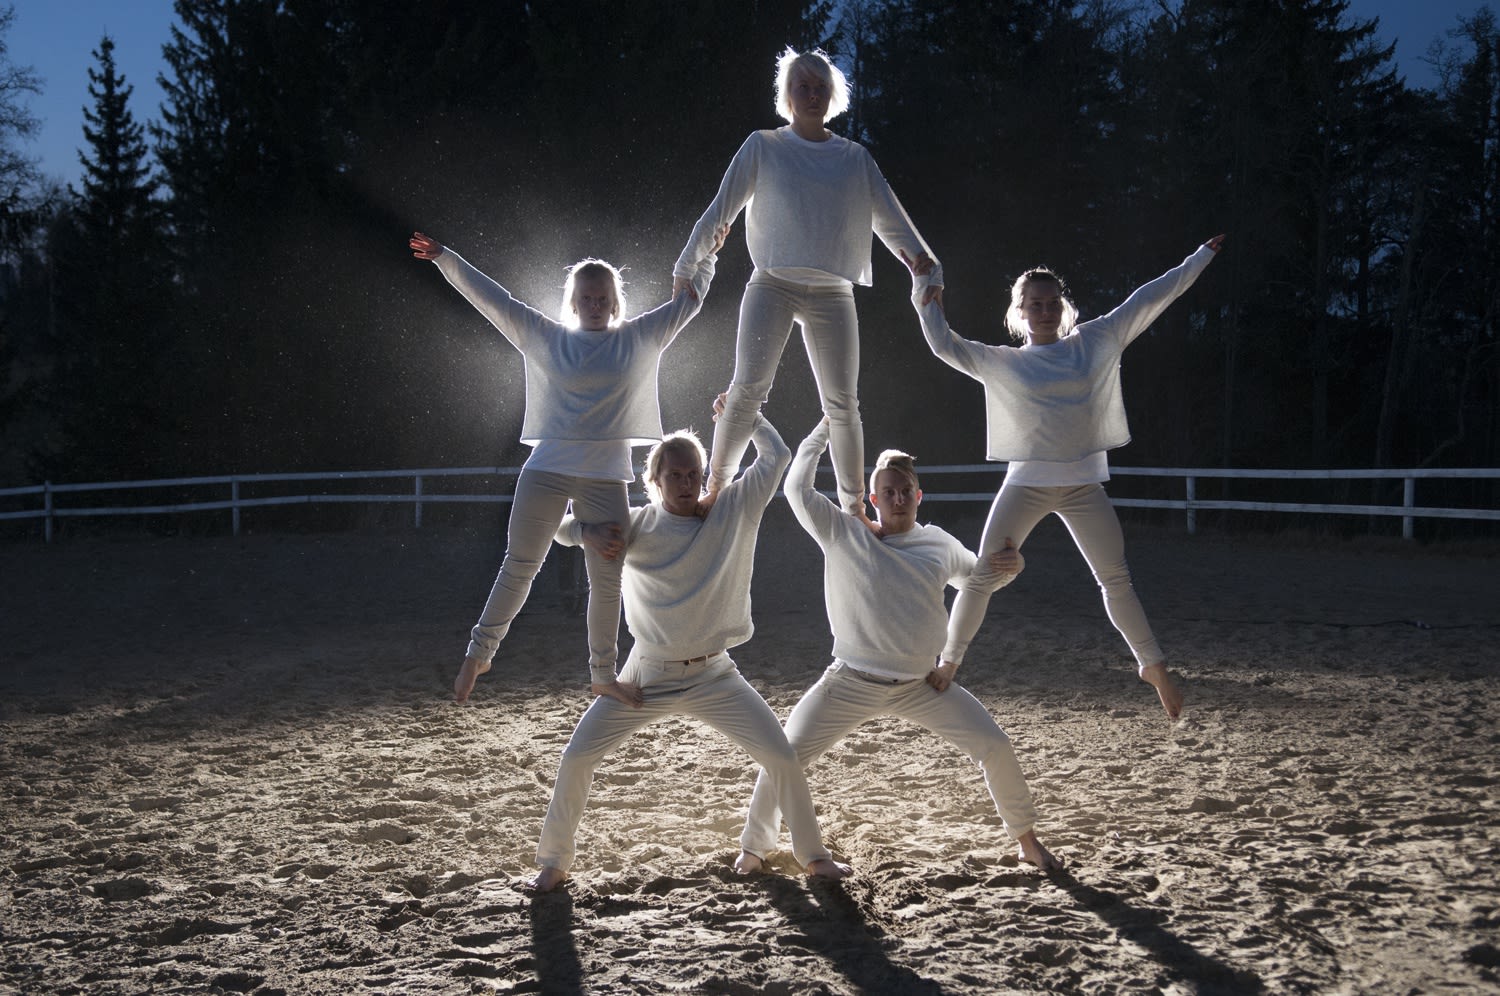 Five dancers in all white create a pyramid structure illuminated by a spotlight.